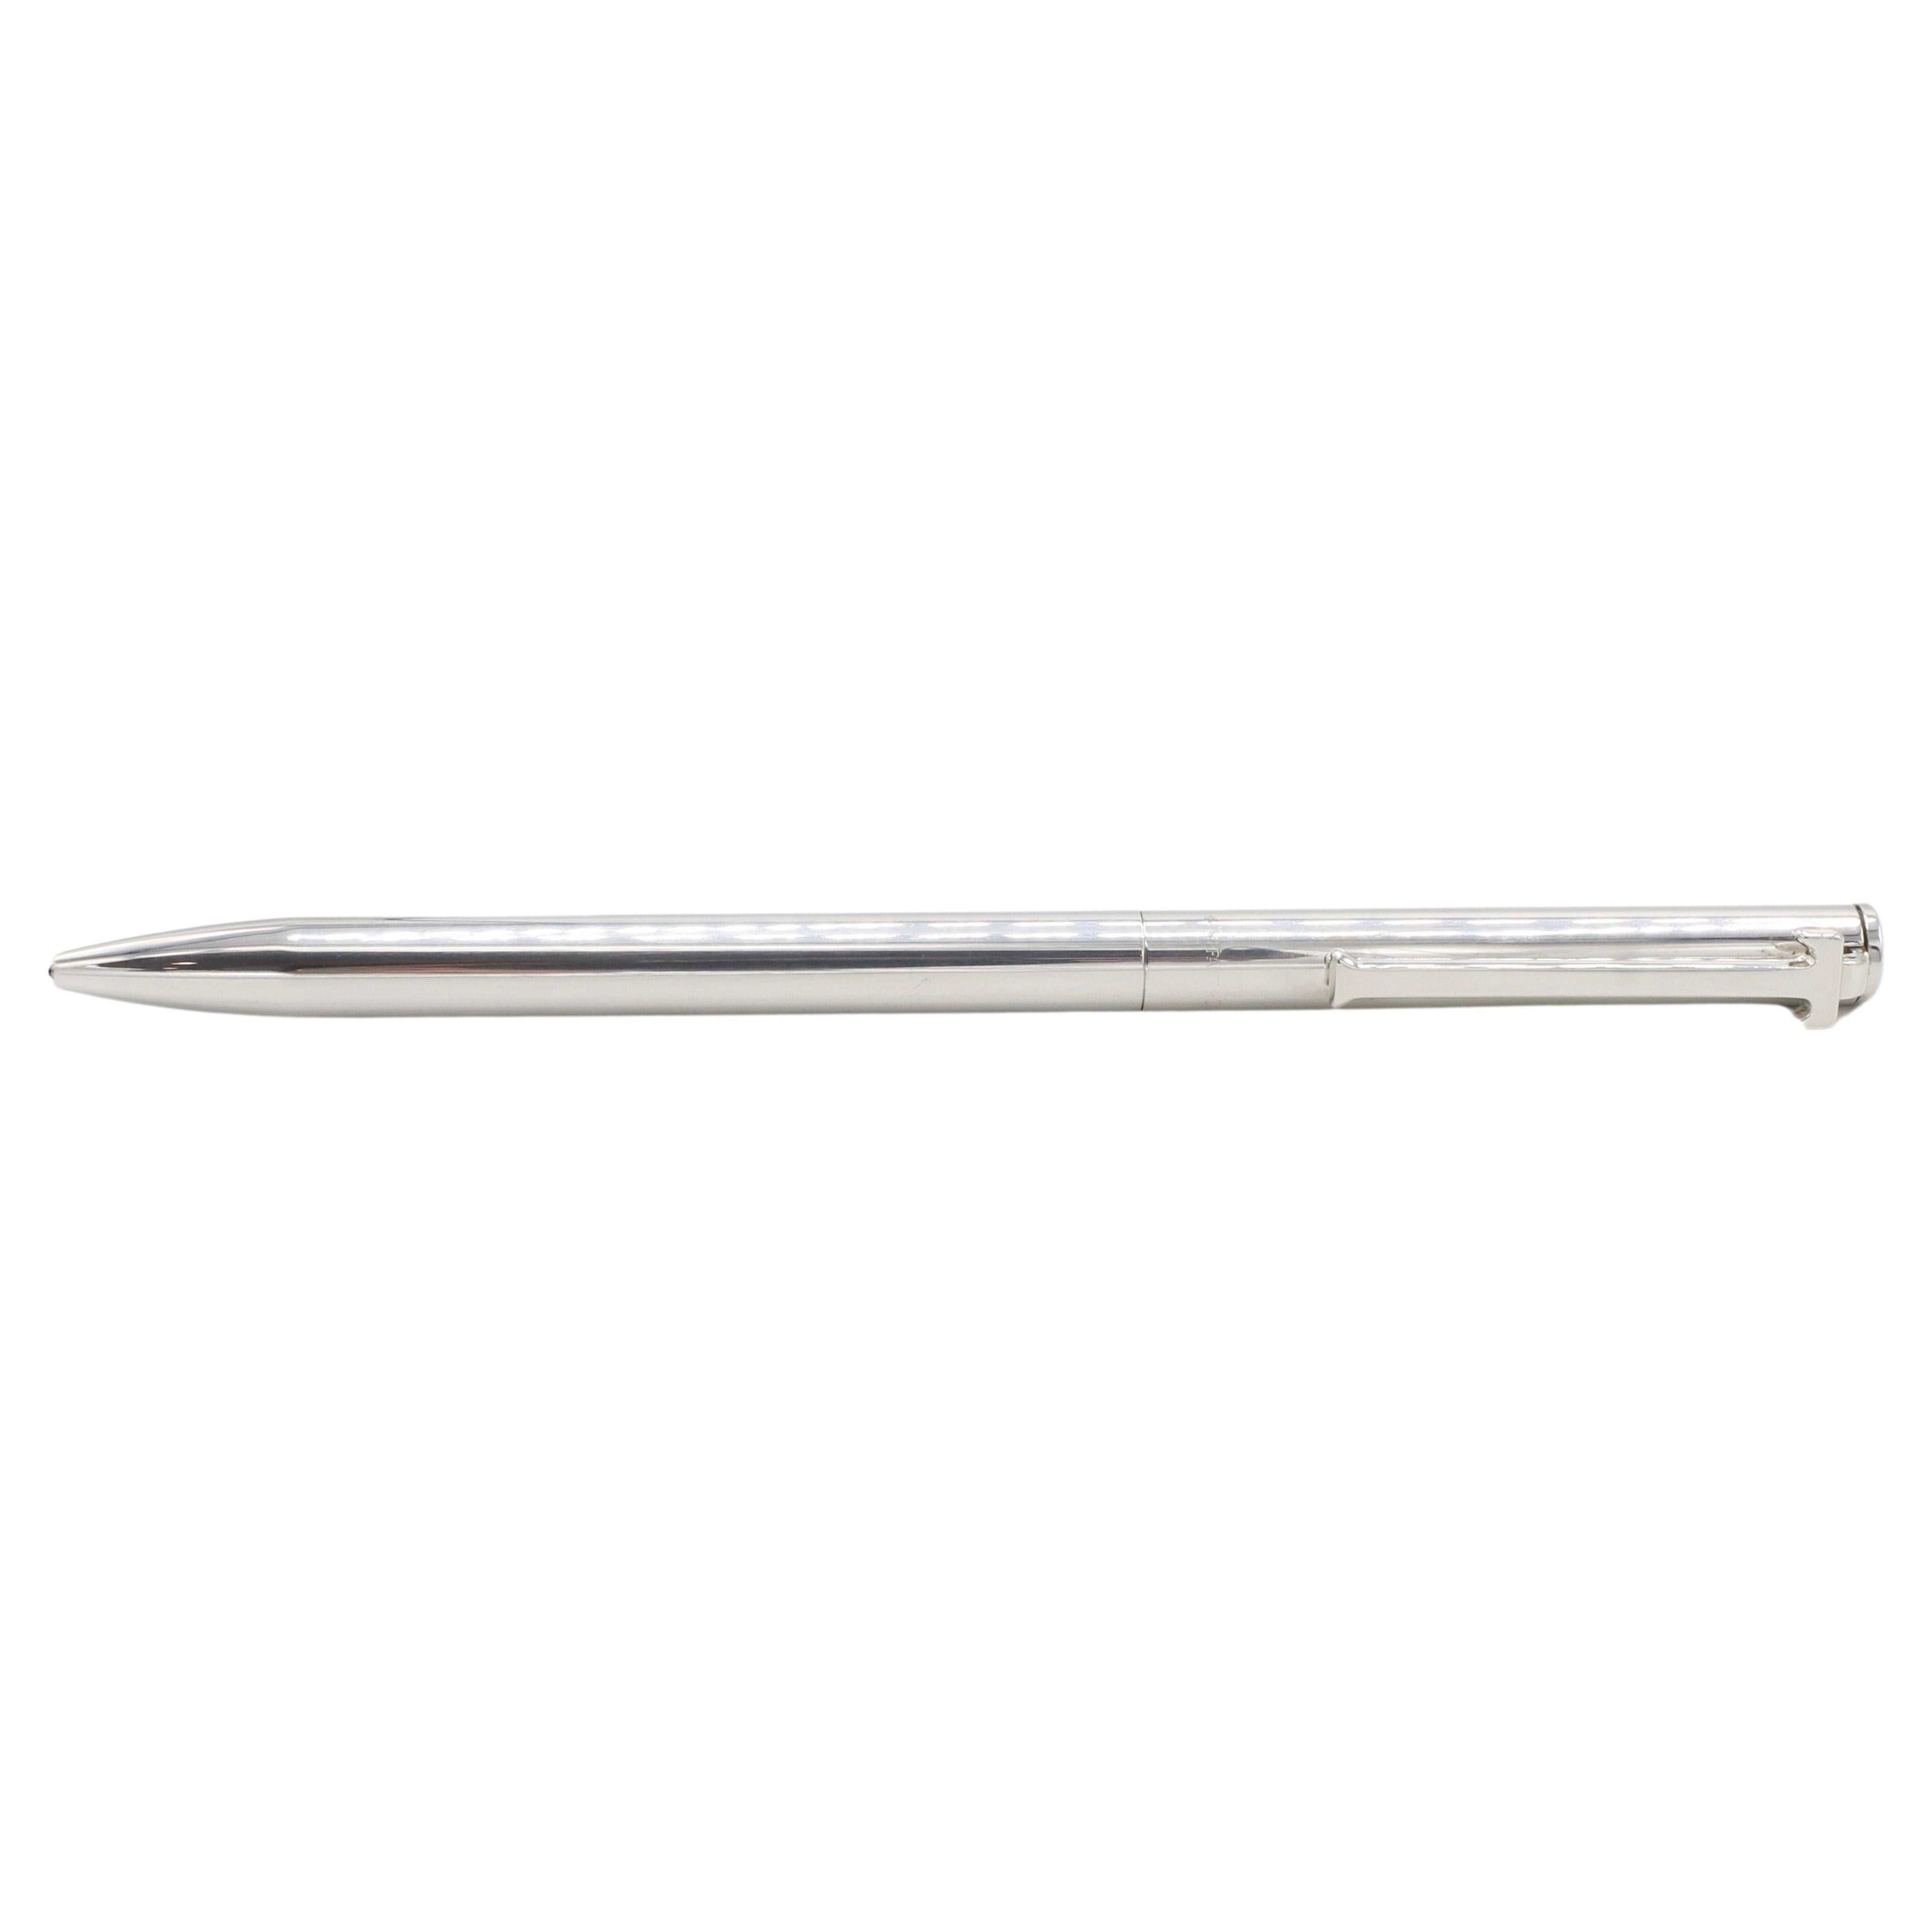 Tiffany & Co.  Executive Tiffany T-clip Ballpoint Pen Sterling Silver with Box
Metal: Sterling silver
Weight: 20.9 grams
Ink: Black
Length: 5.25 inches
Width: 7.5mm
Signed: ©Tiffany & Co. 925 U.S.A.
Retail: $275 USD
